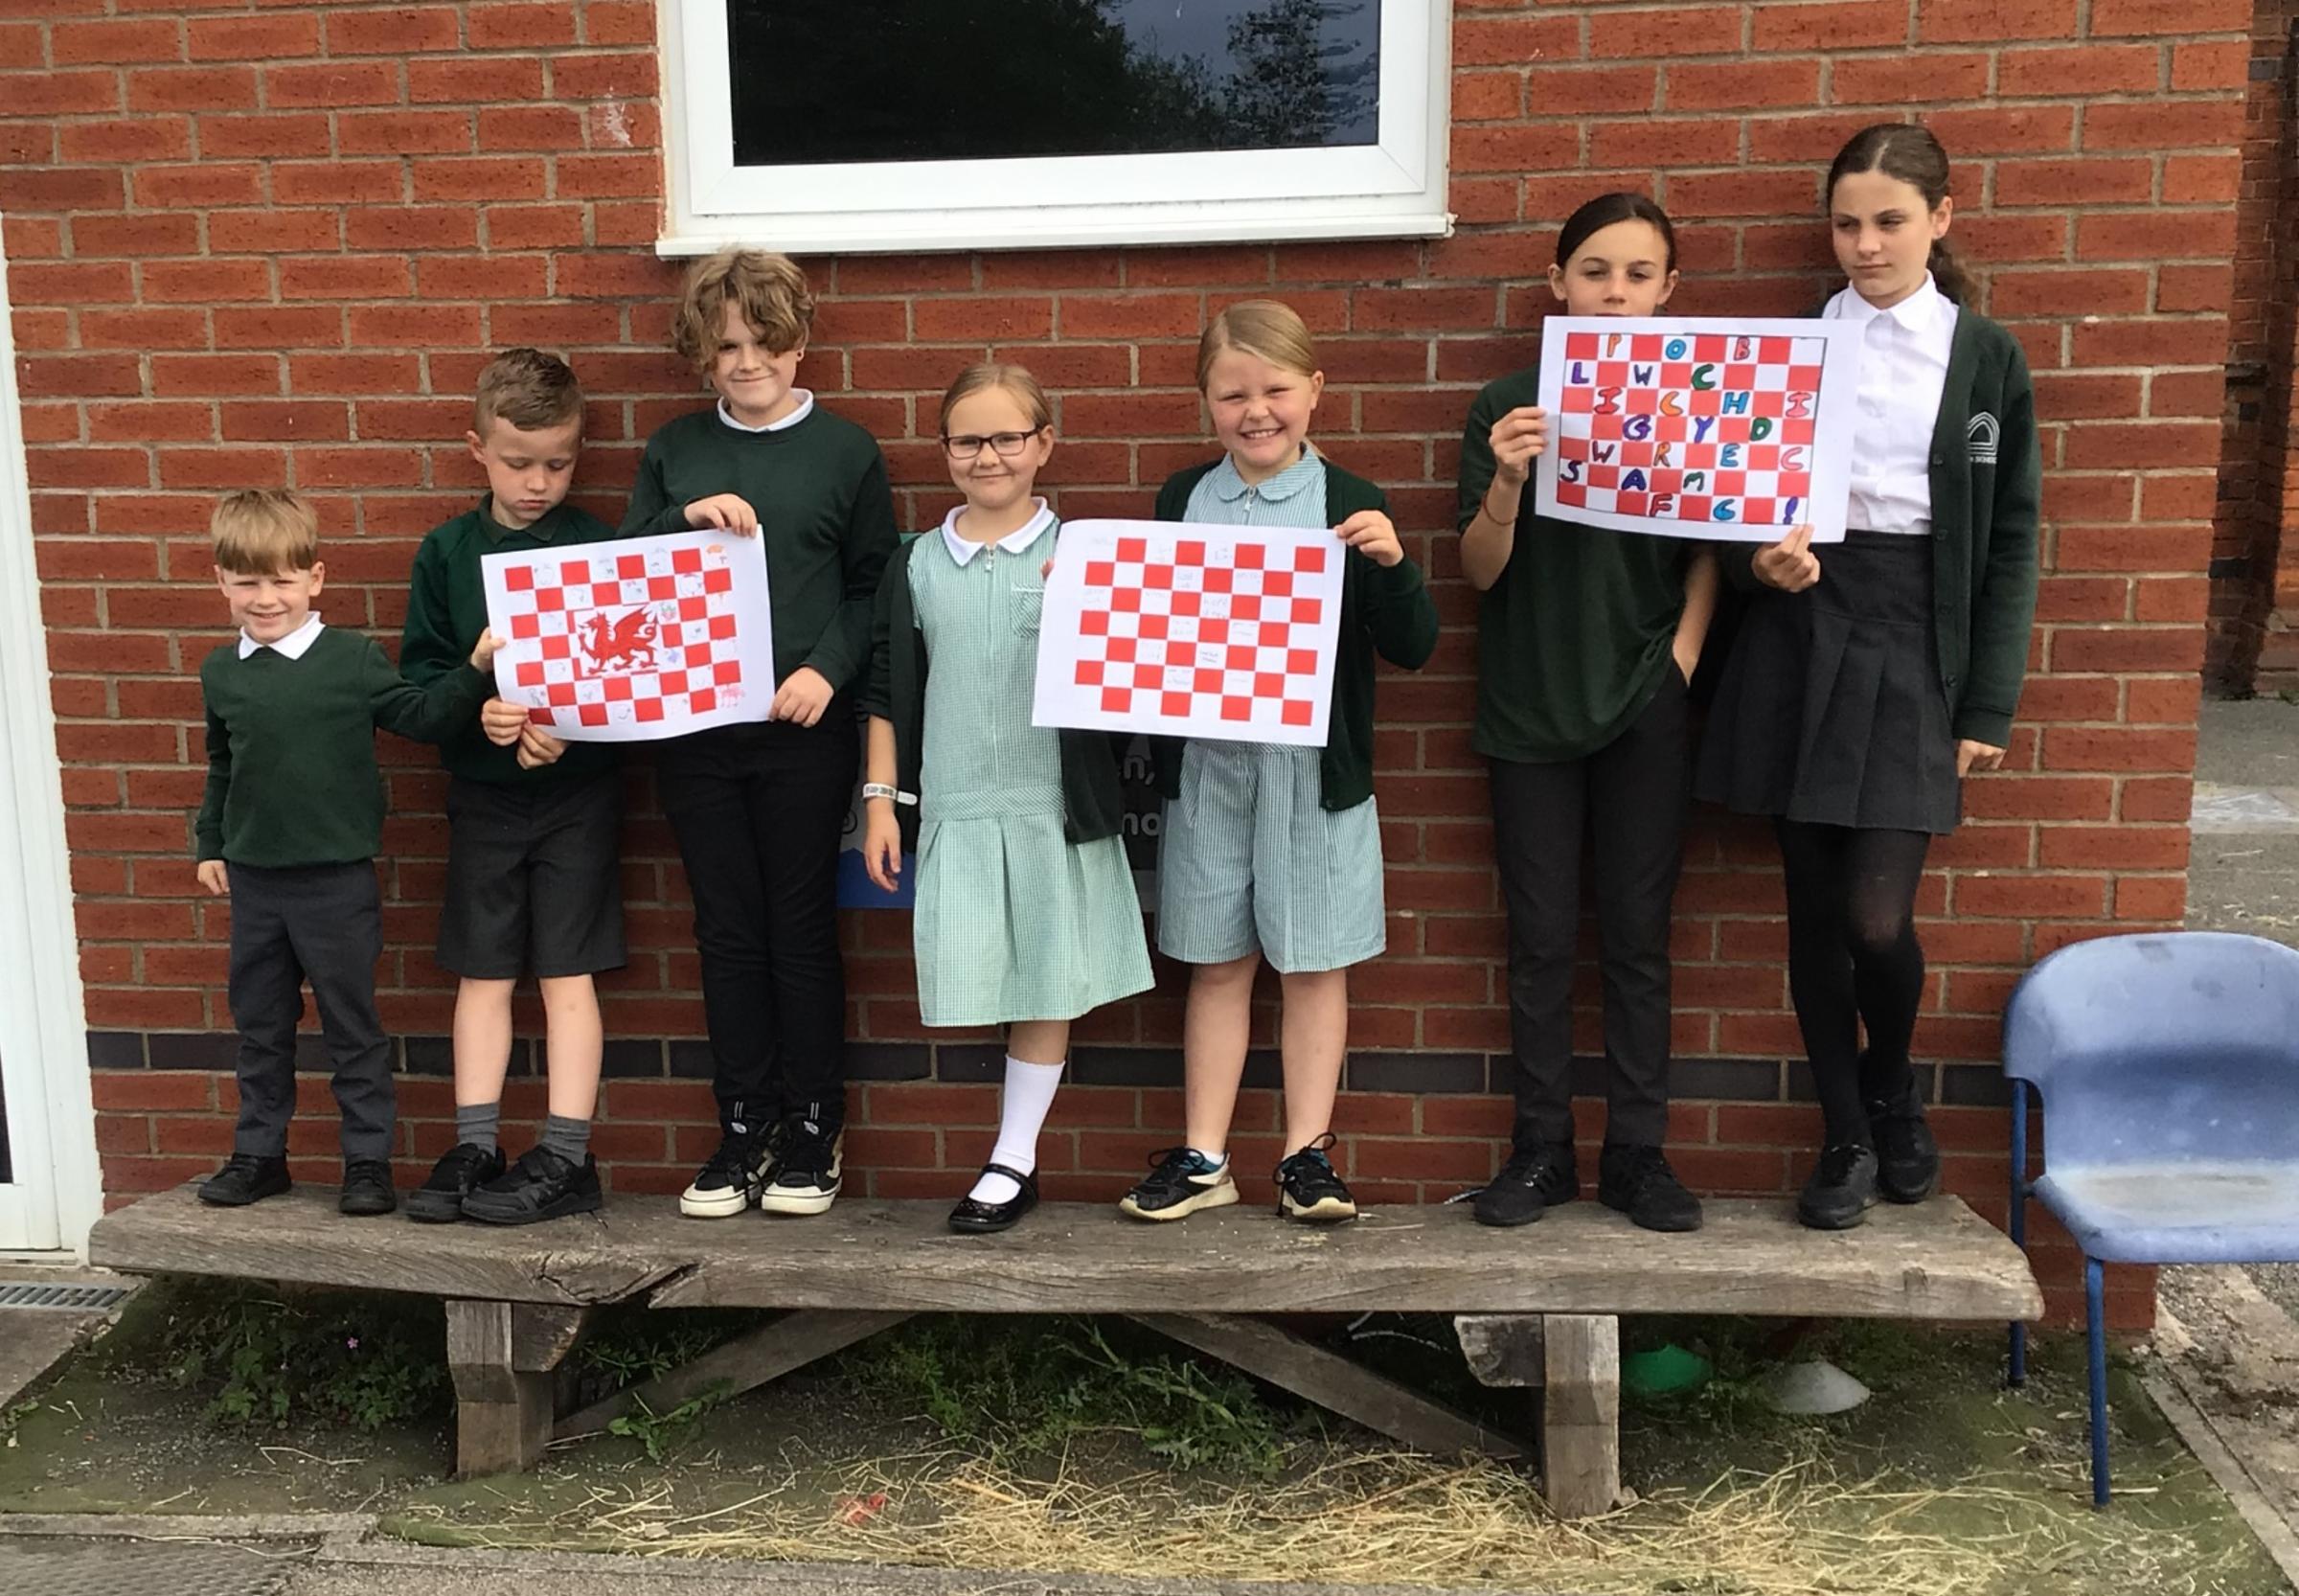 Pupils at Eyton Primary School with some of their good luck flags for Wrexham AFC.